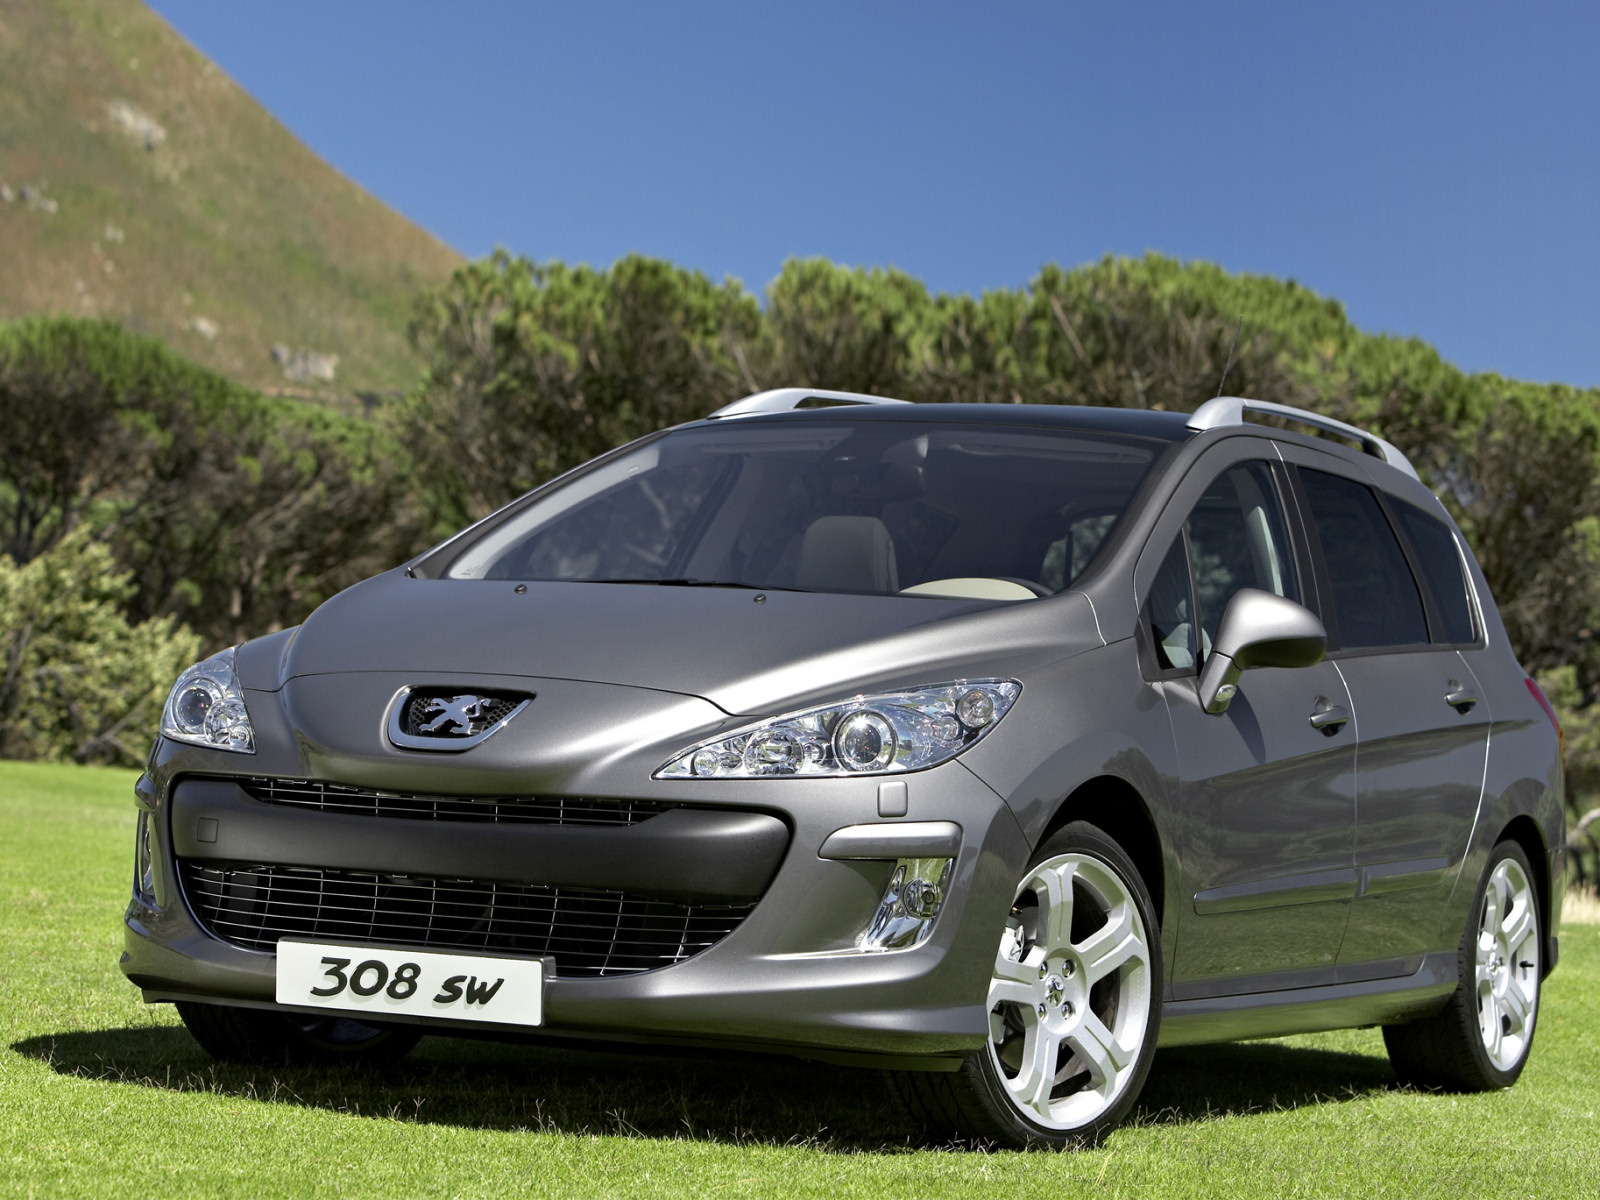 Car in pictures car photo gallery » Peugeot 308 SW 2008